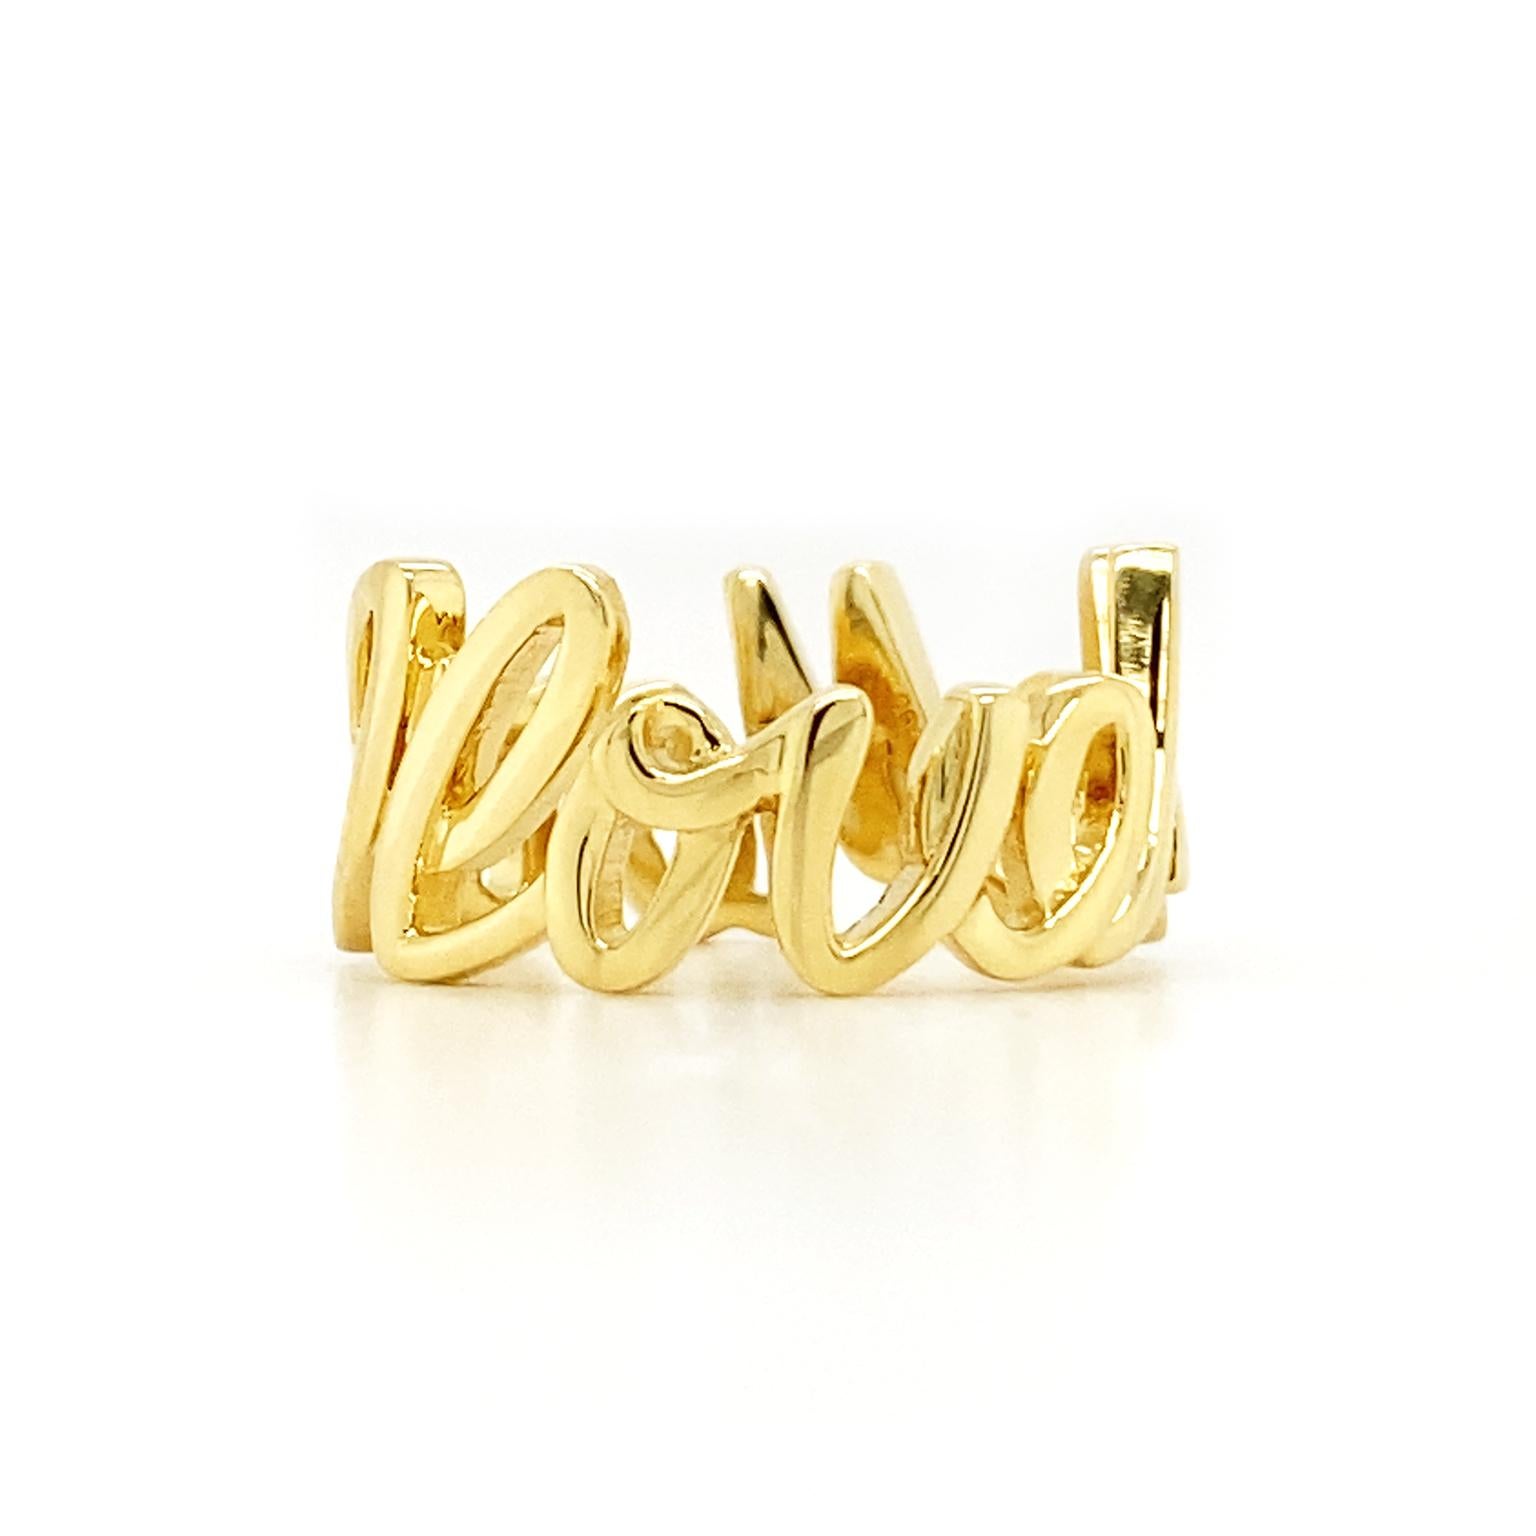 Gold replaces ink to make this ring. Rather than paper, 18k yellow gold is shaped into 9.75mm high letters, forming the message, 'I love me more.' The cursive font allows the letters to run together, turning the words into a band. A strong finish